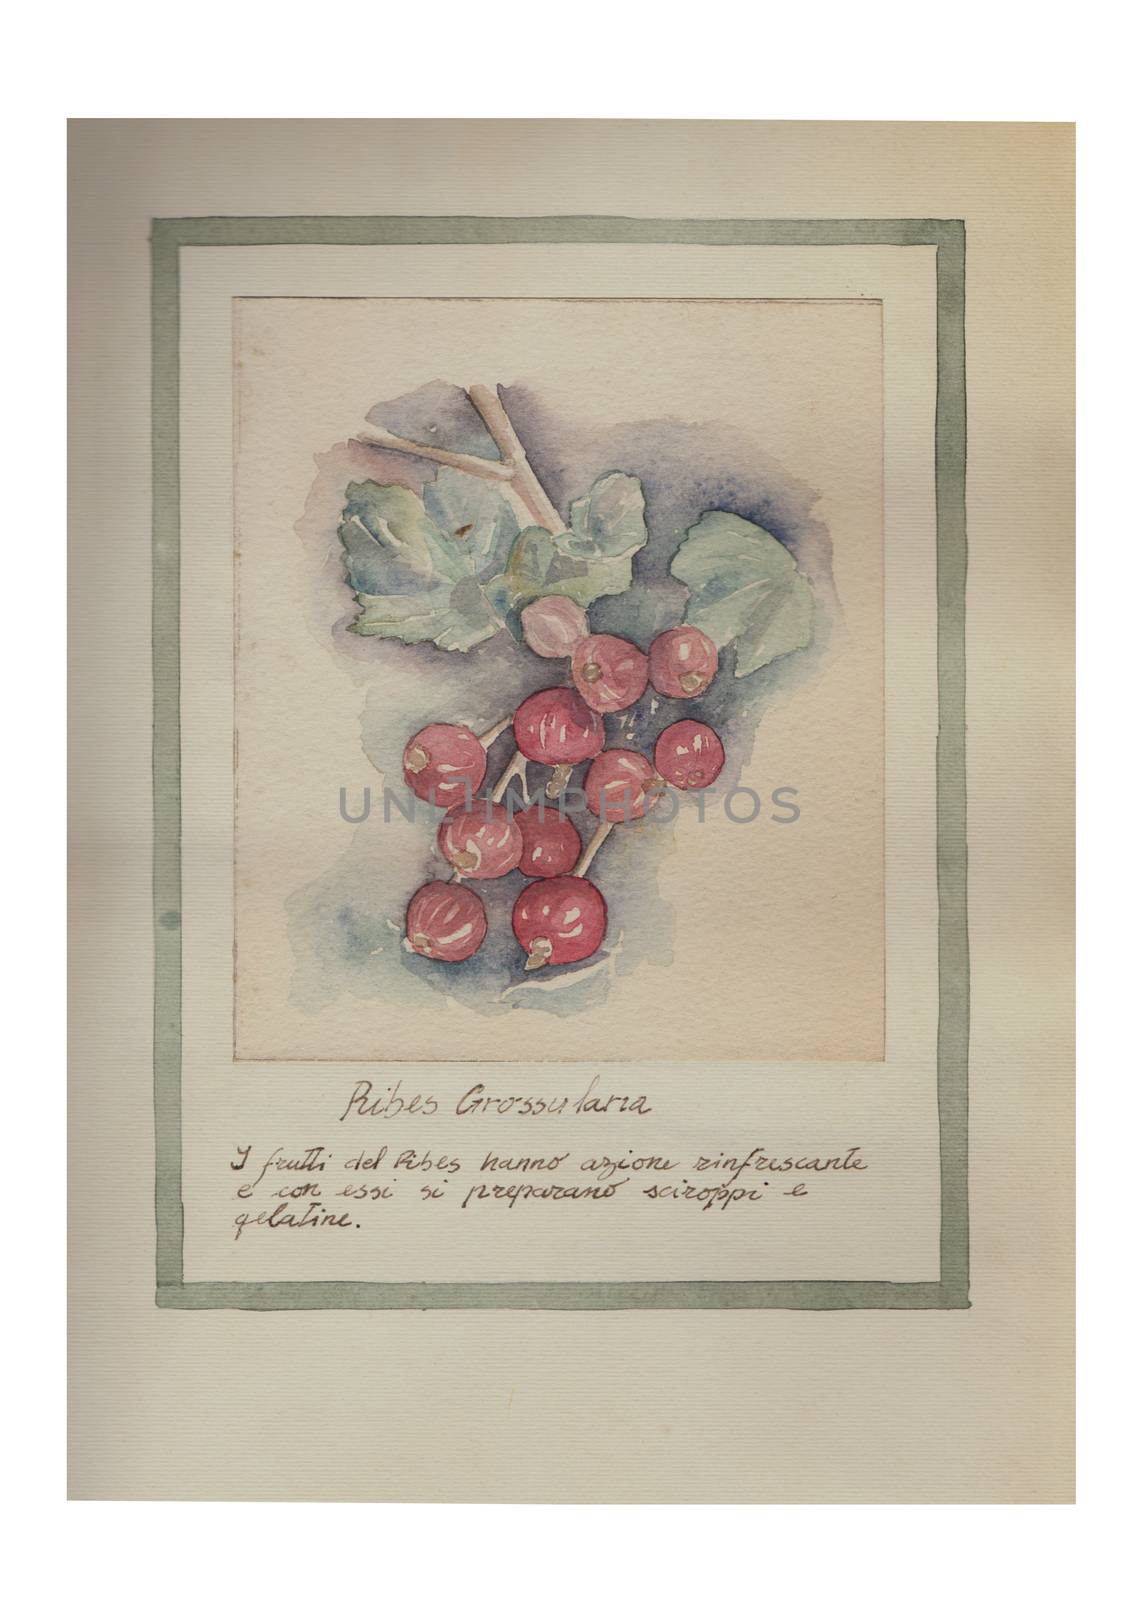 Hand drawn watercolor painting decorative -Ribes Grossularia